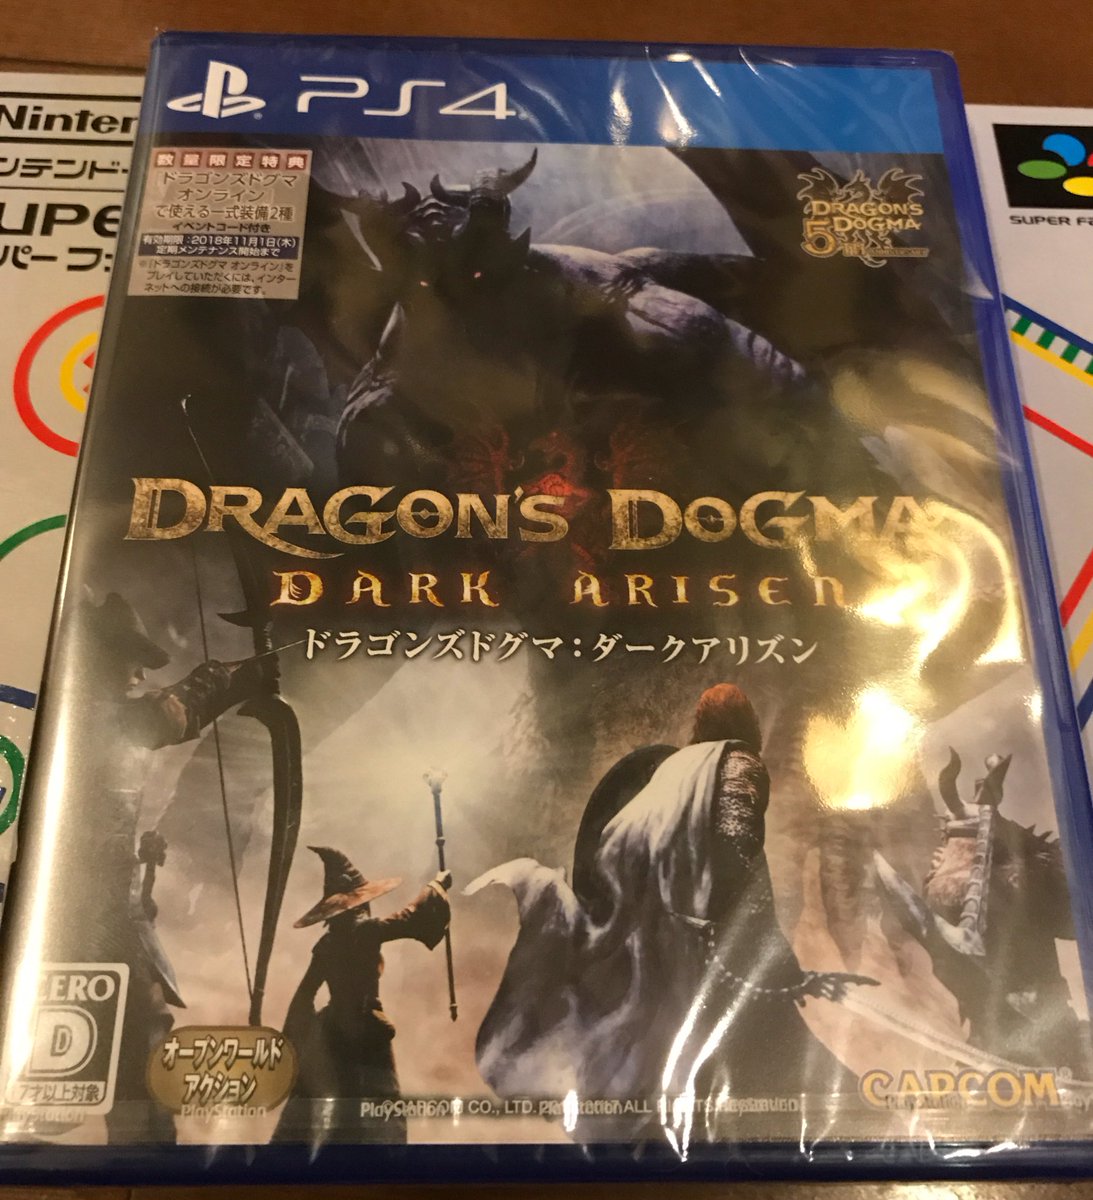 Hideaki Itsuno Dragon S Dogma Dark Arisen Is On Sale Today Why Don T You Try It After A Long Time ドラゴンズドグマps4版発売です 久しぶりにやってみる